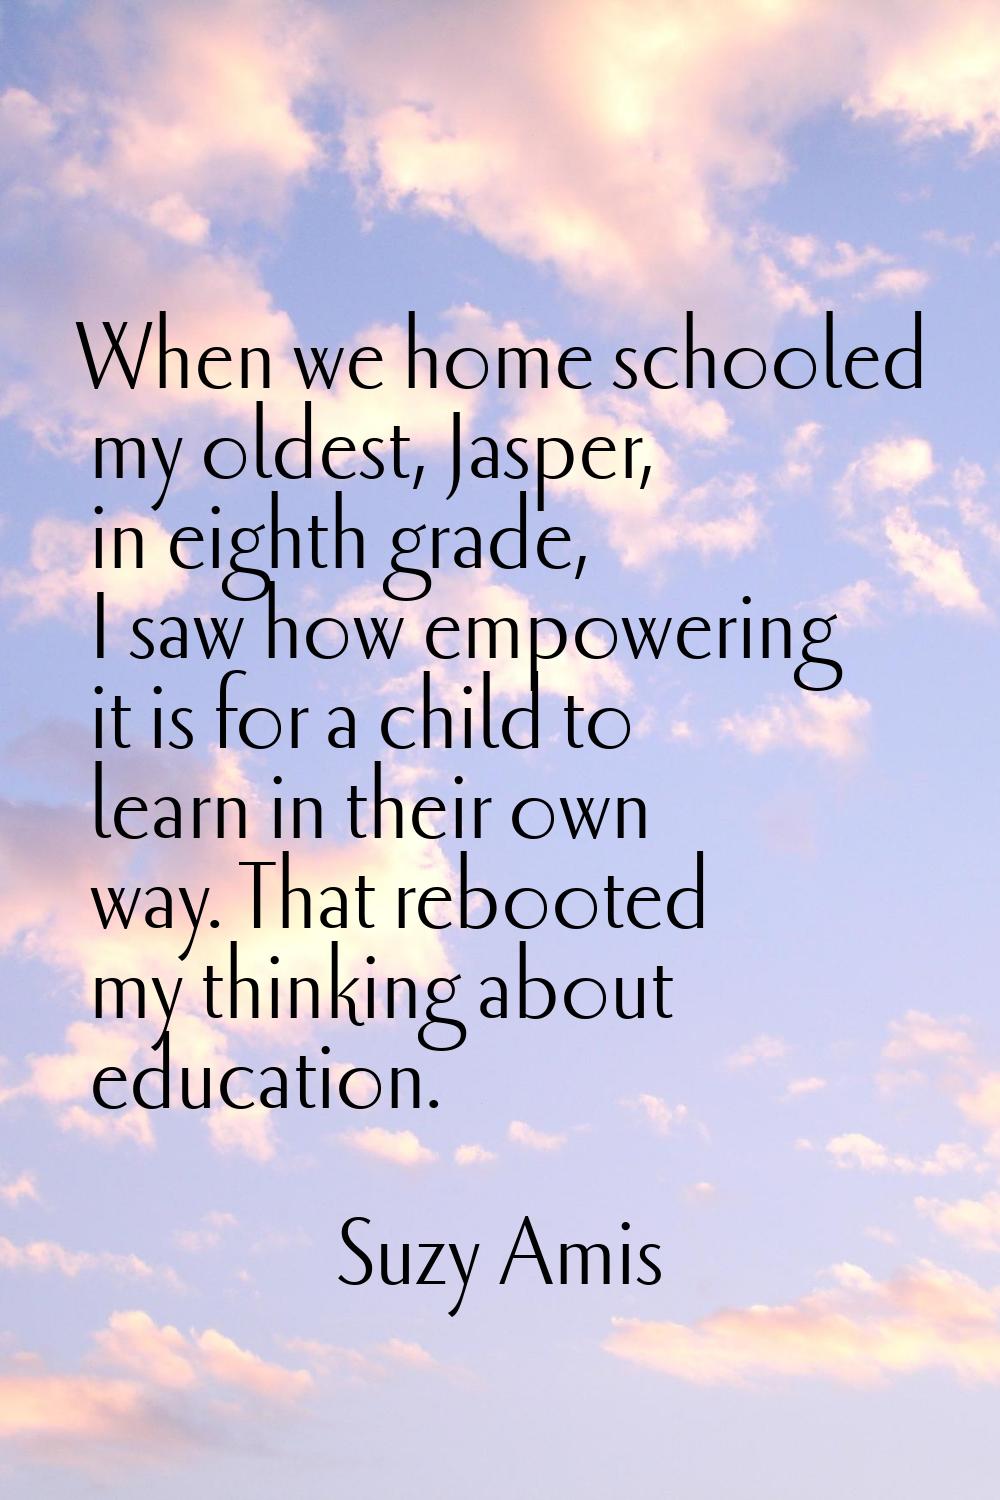 When we home schooled my oldest, Jasper, in eighth grade, I saw how empowering it is for a child to